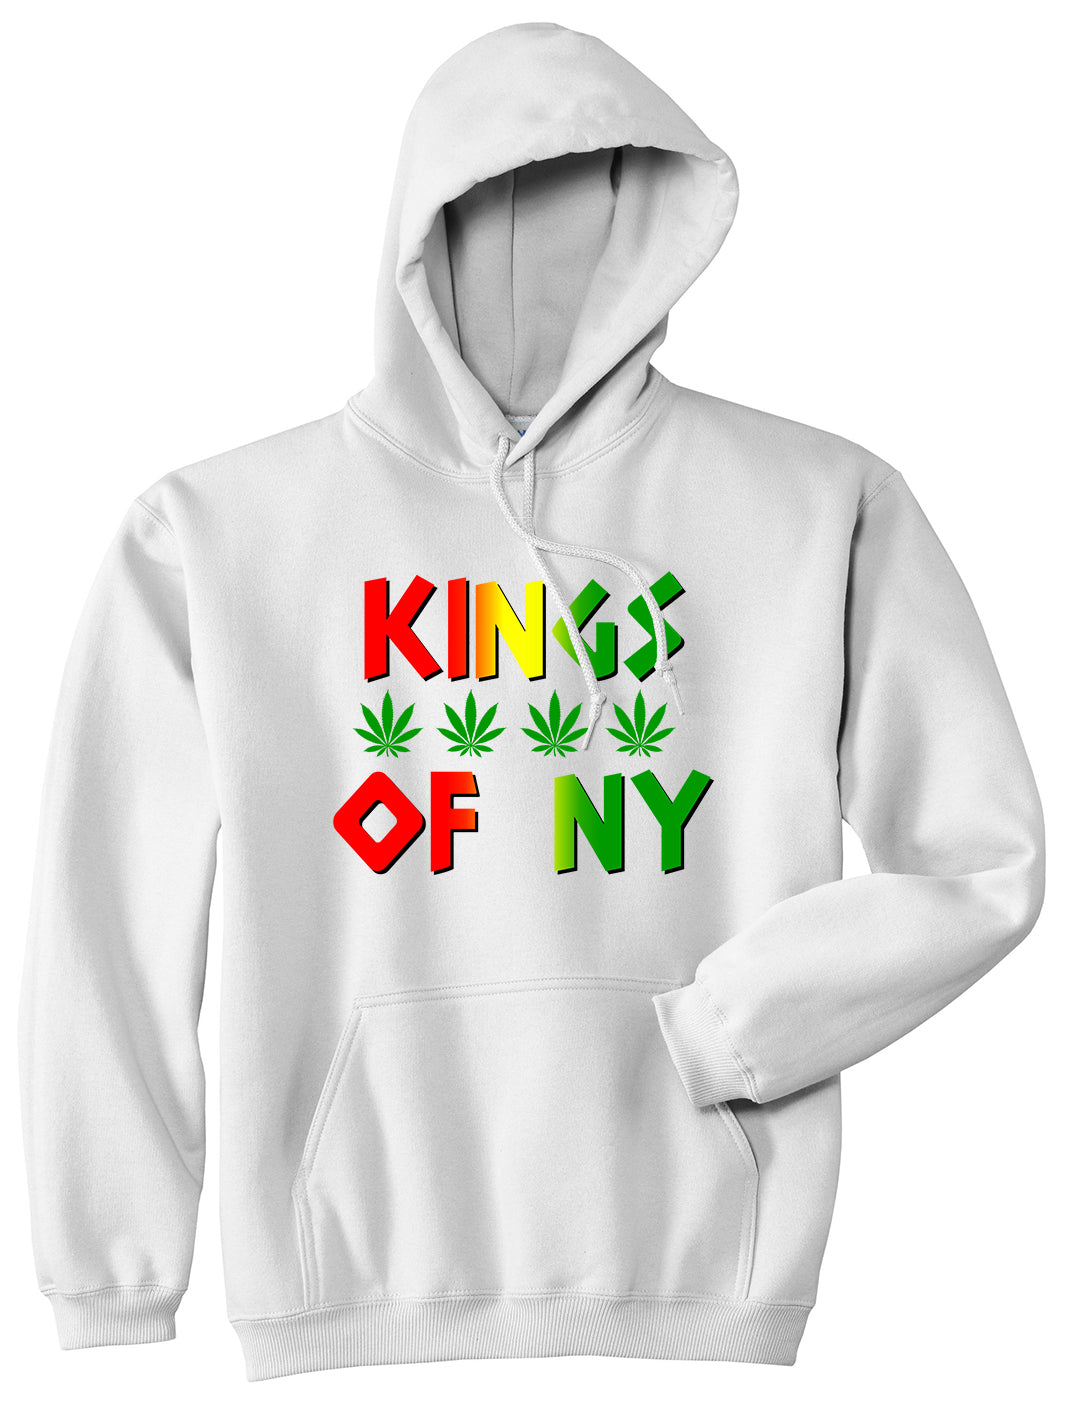 Puff Puff Pass Mens Pullover Hoodie White by Kings Of NY